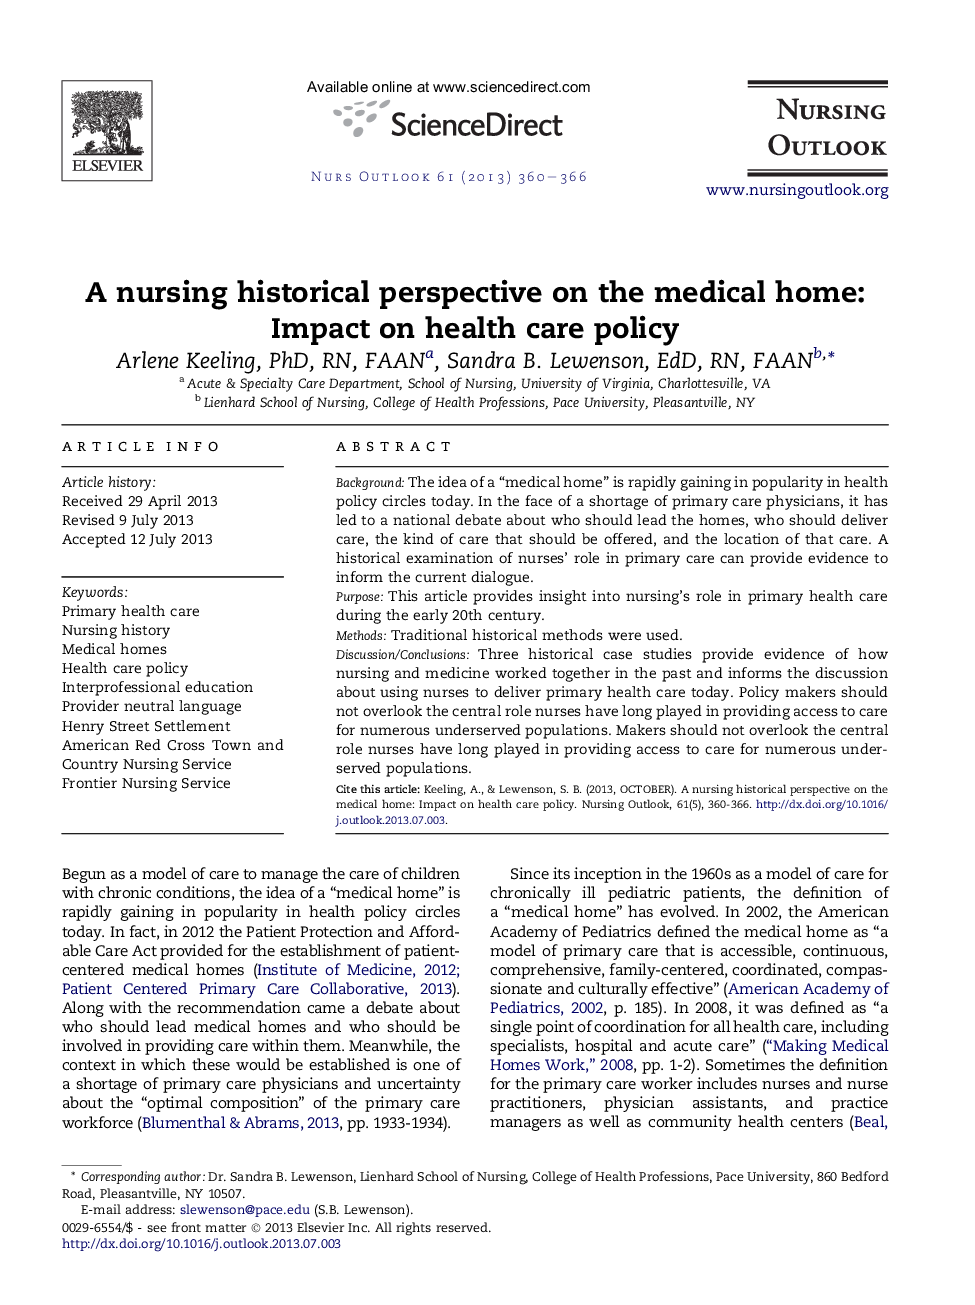 A nursing historical perspective on the medical home: Impact on health care policy